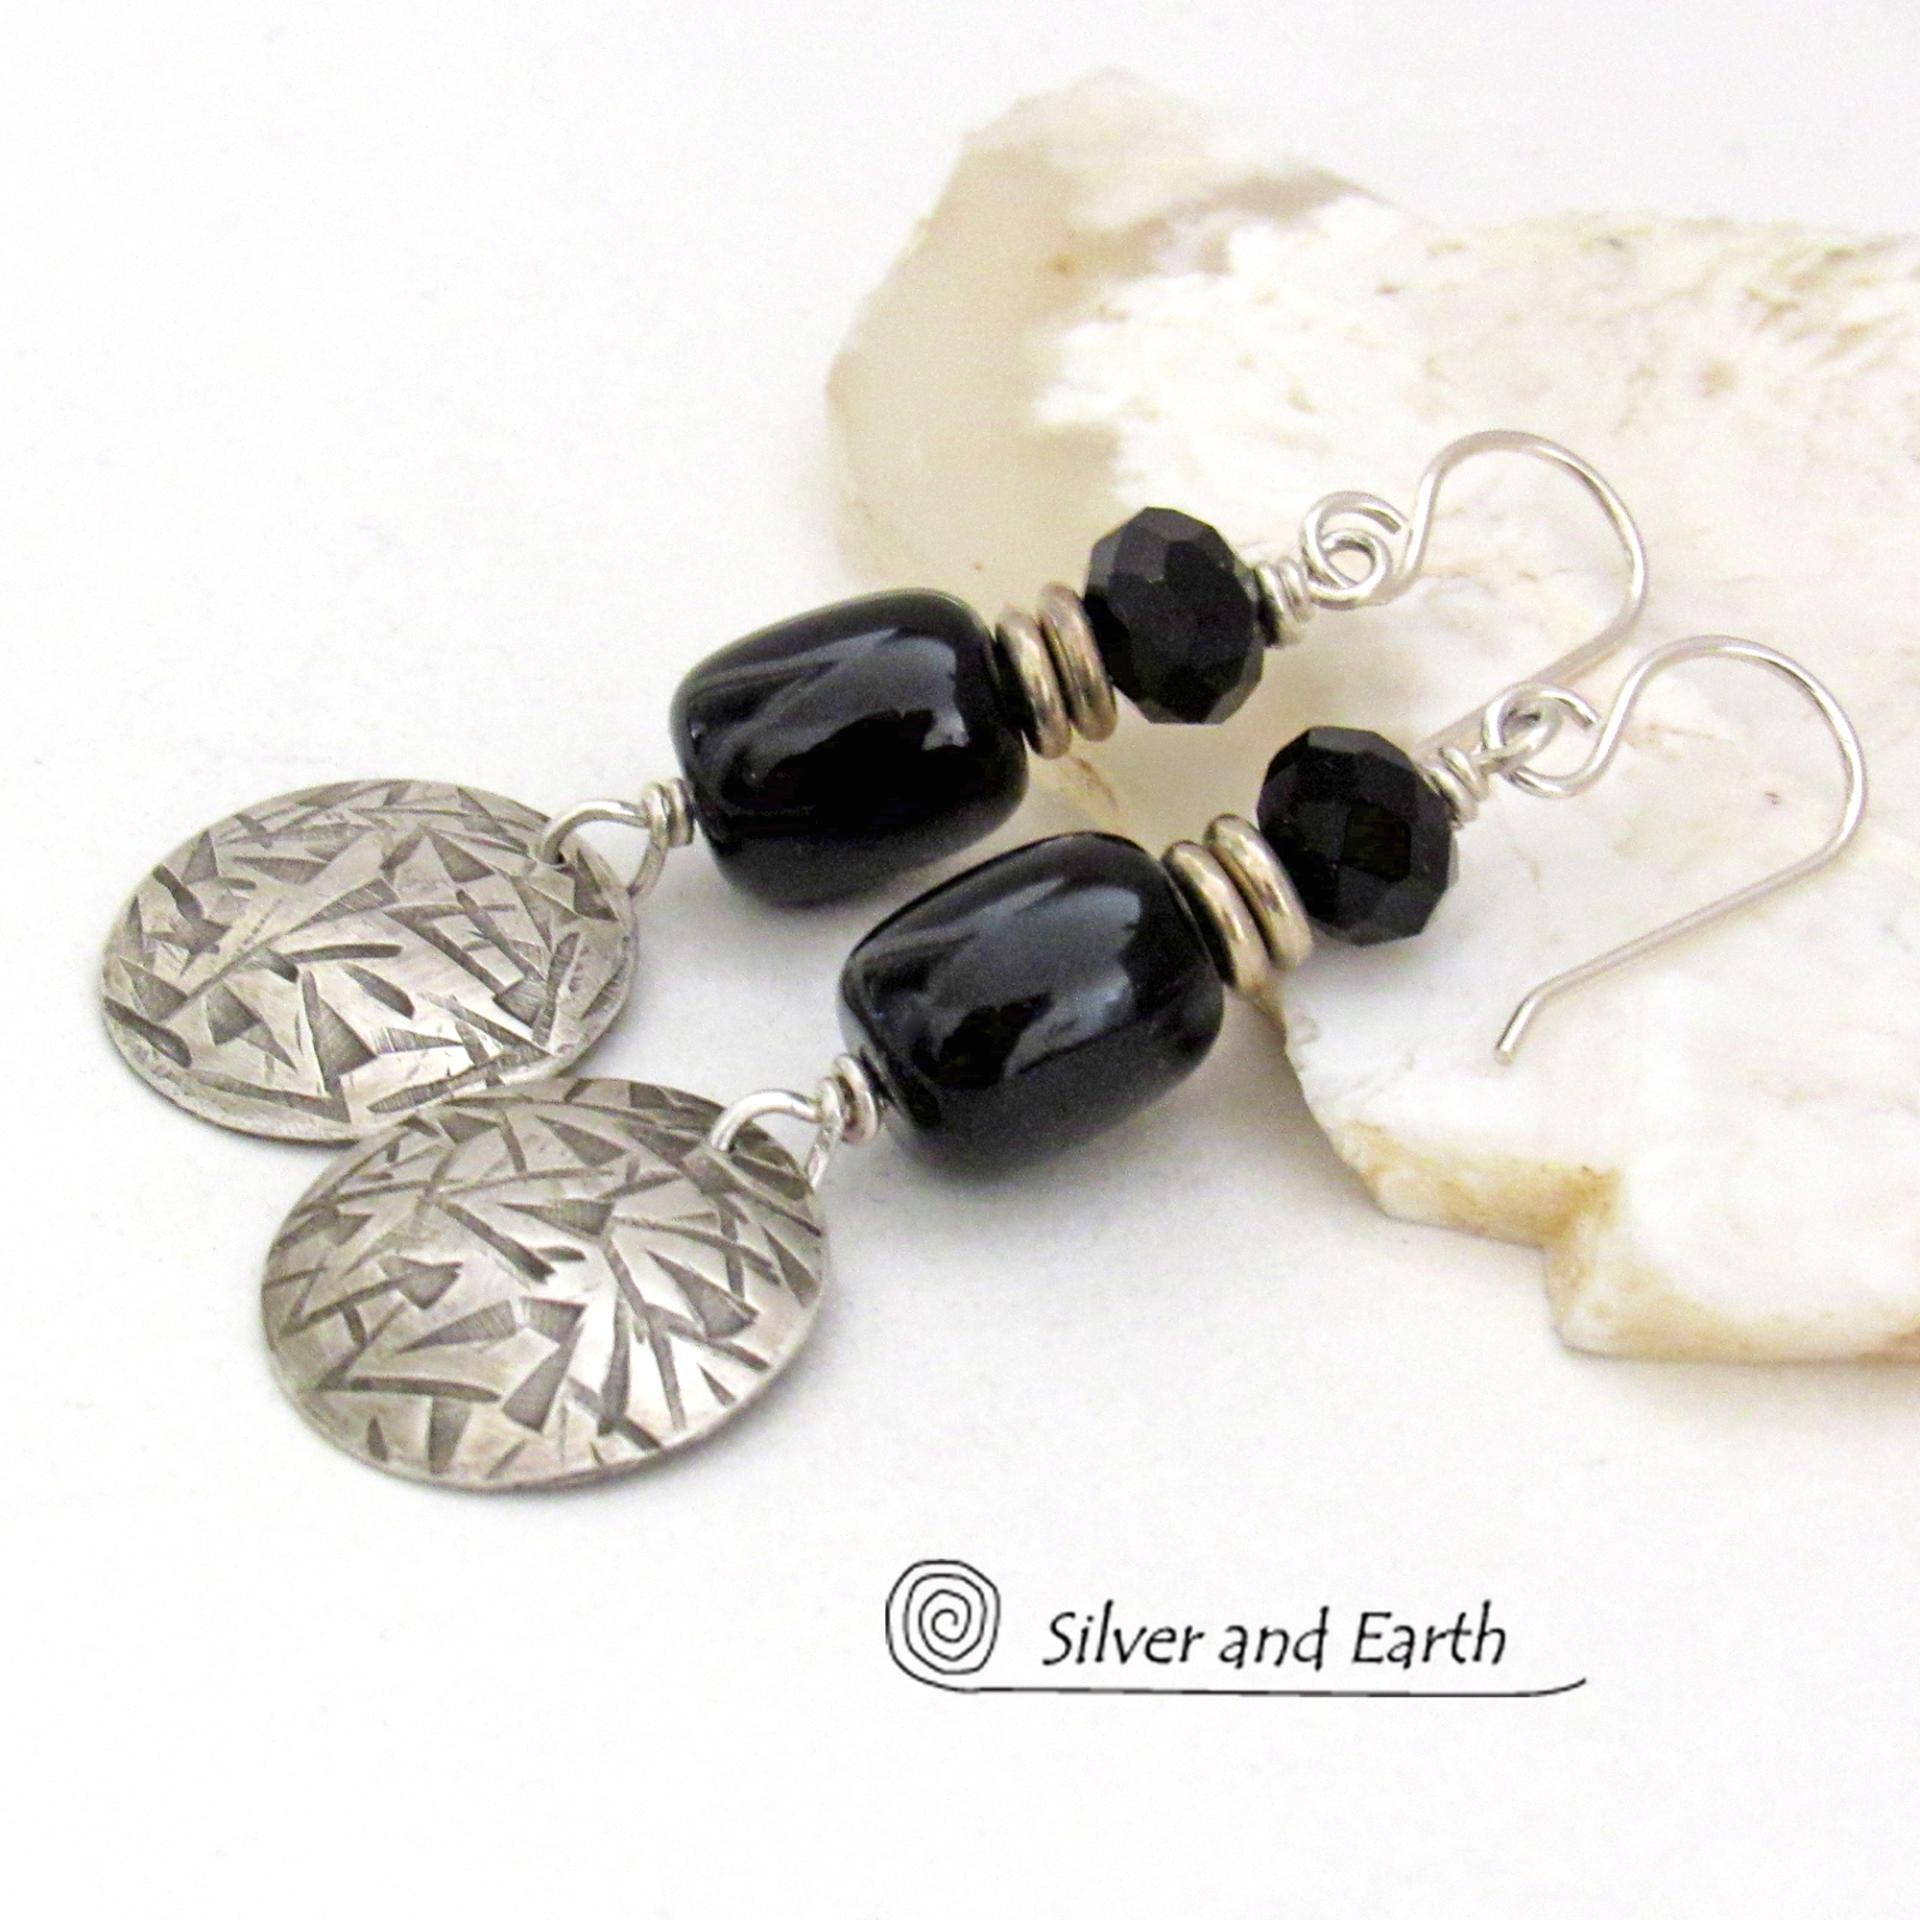 Hand Stamped Sterling Silver Earrings with Black Onyx Gemstones & Faceted Crystal Beads